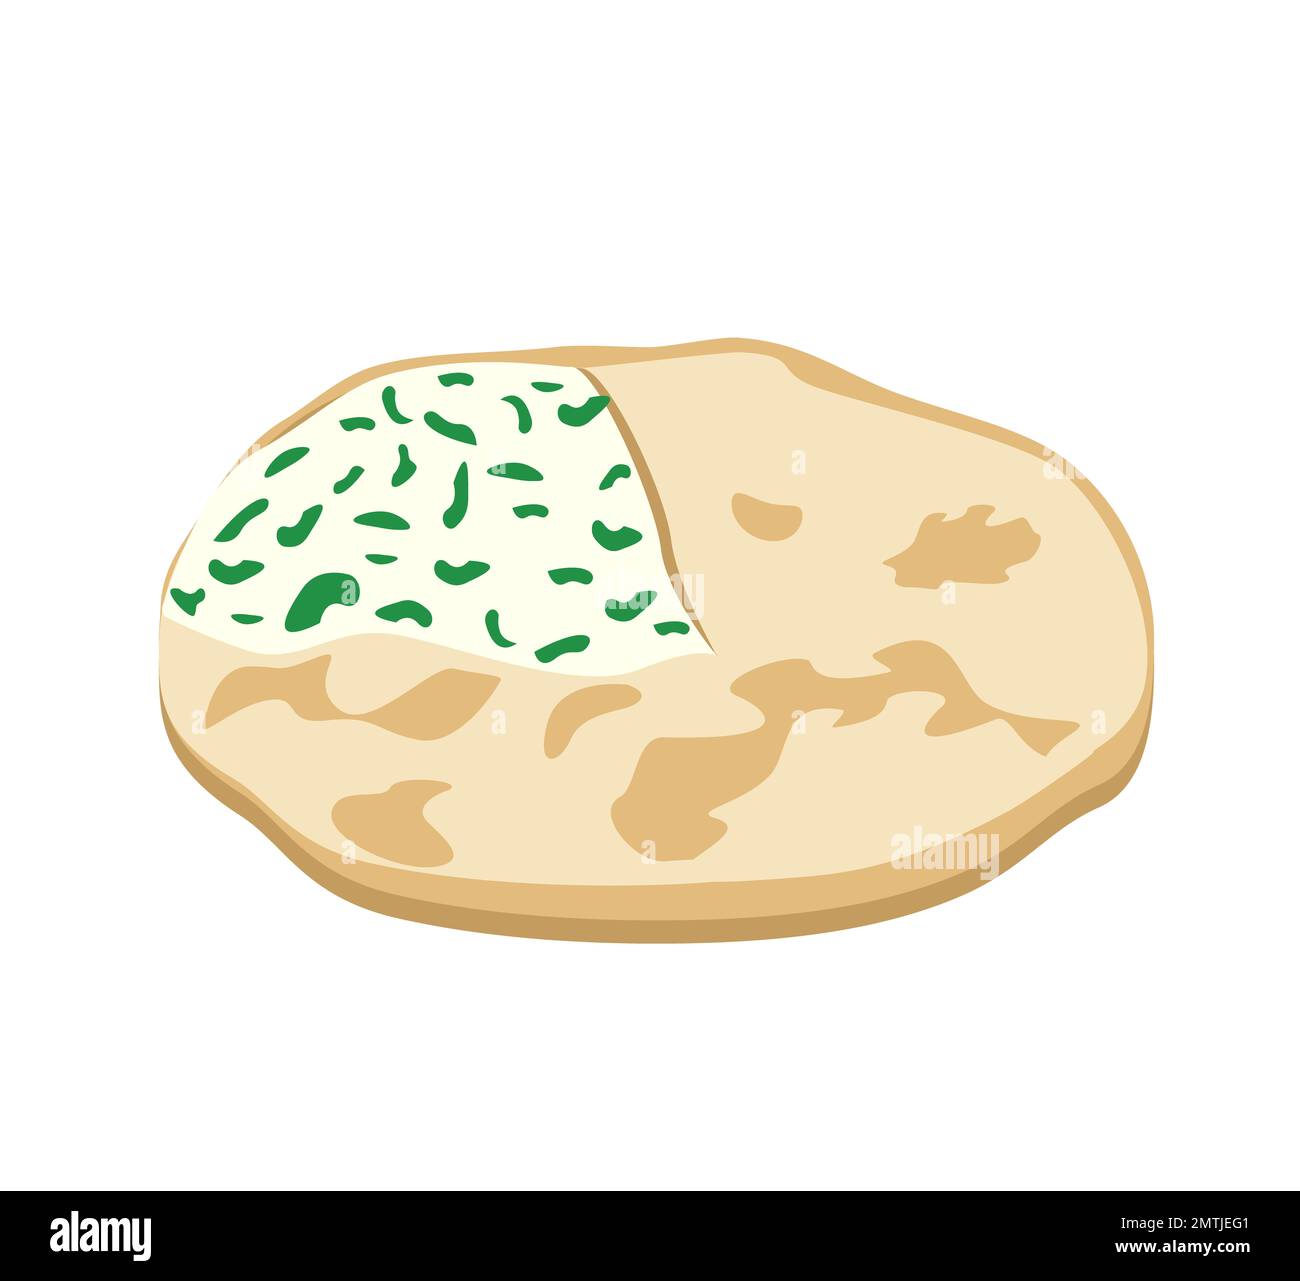 Traditional Osetian or Dagestani Caucasian pie flatbread. Baked bread filled with curd, cottage cheese and green.Flat Vector Illustration isolated on Stock Photo